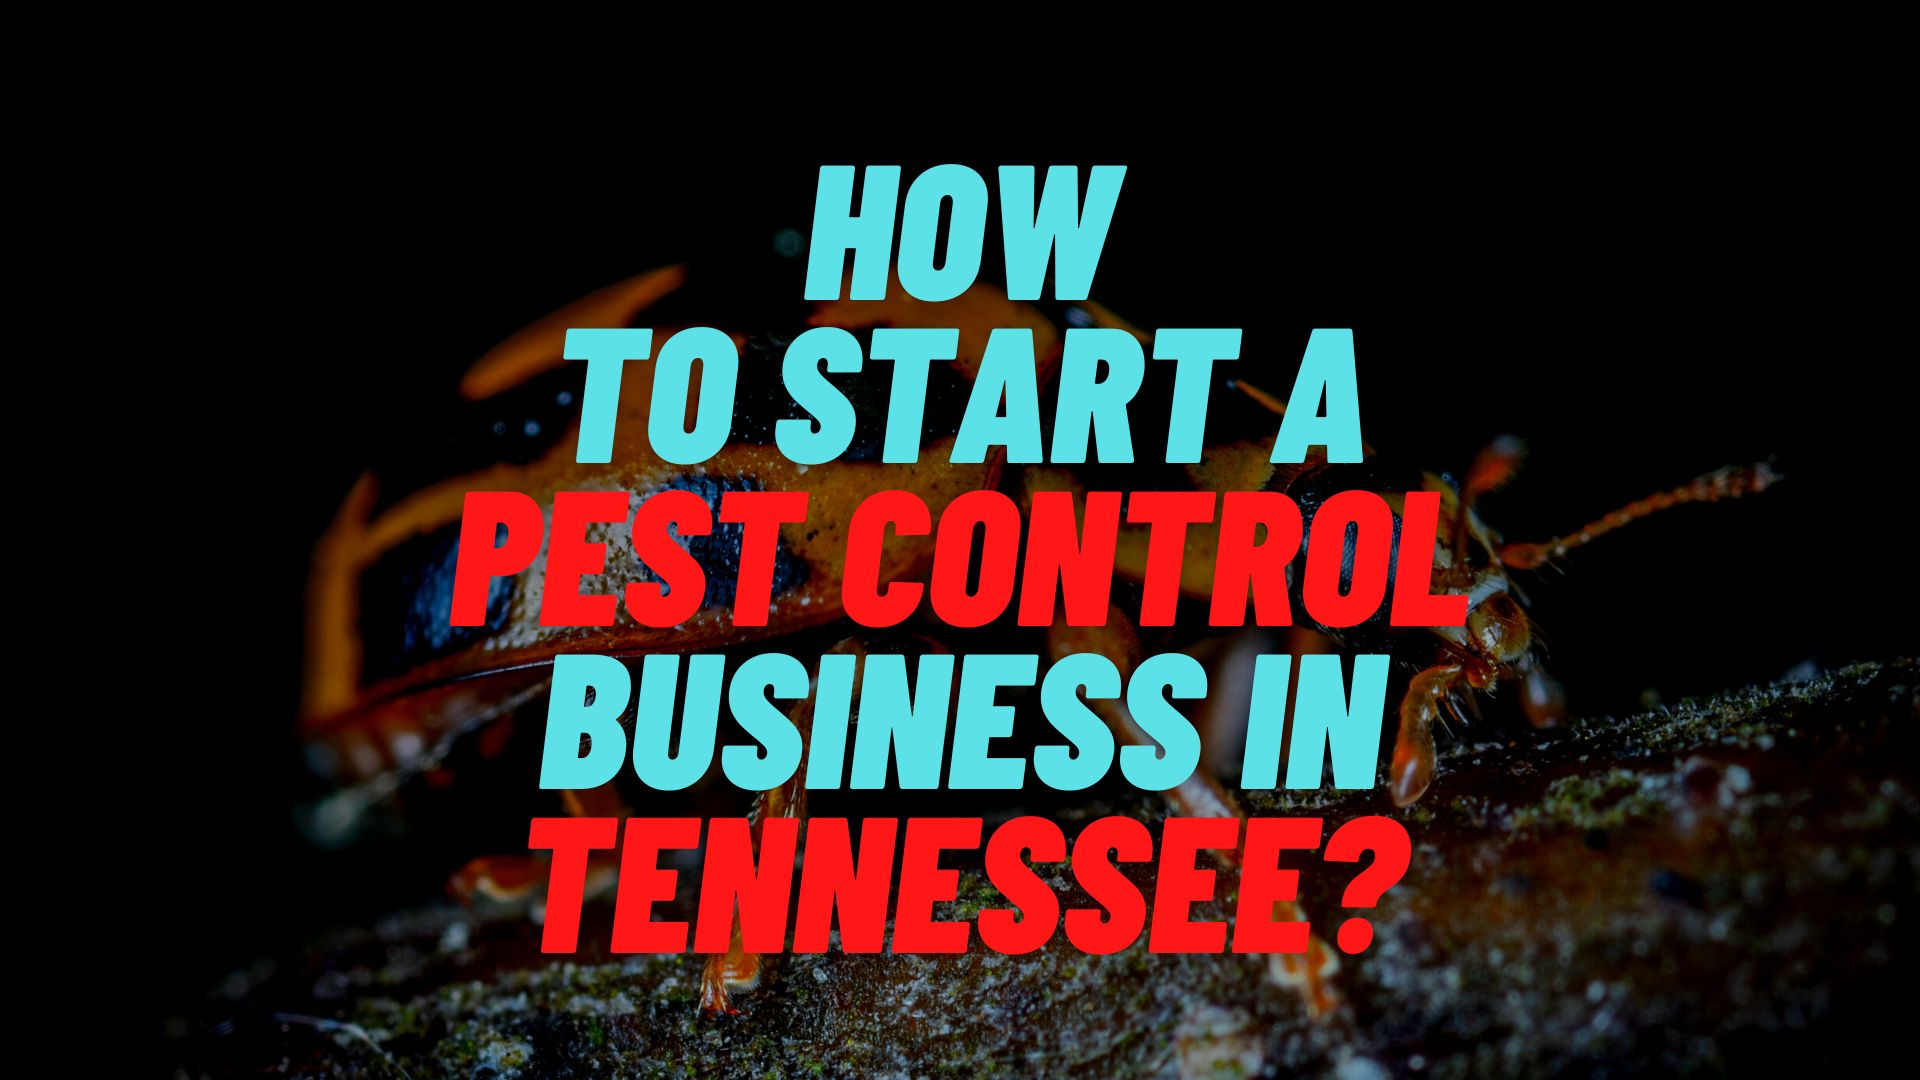 How to start a pest control business in Tennessee?